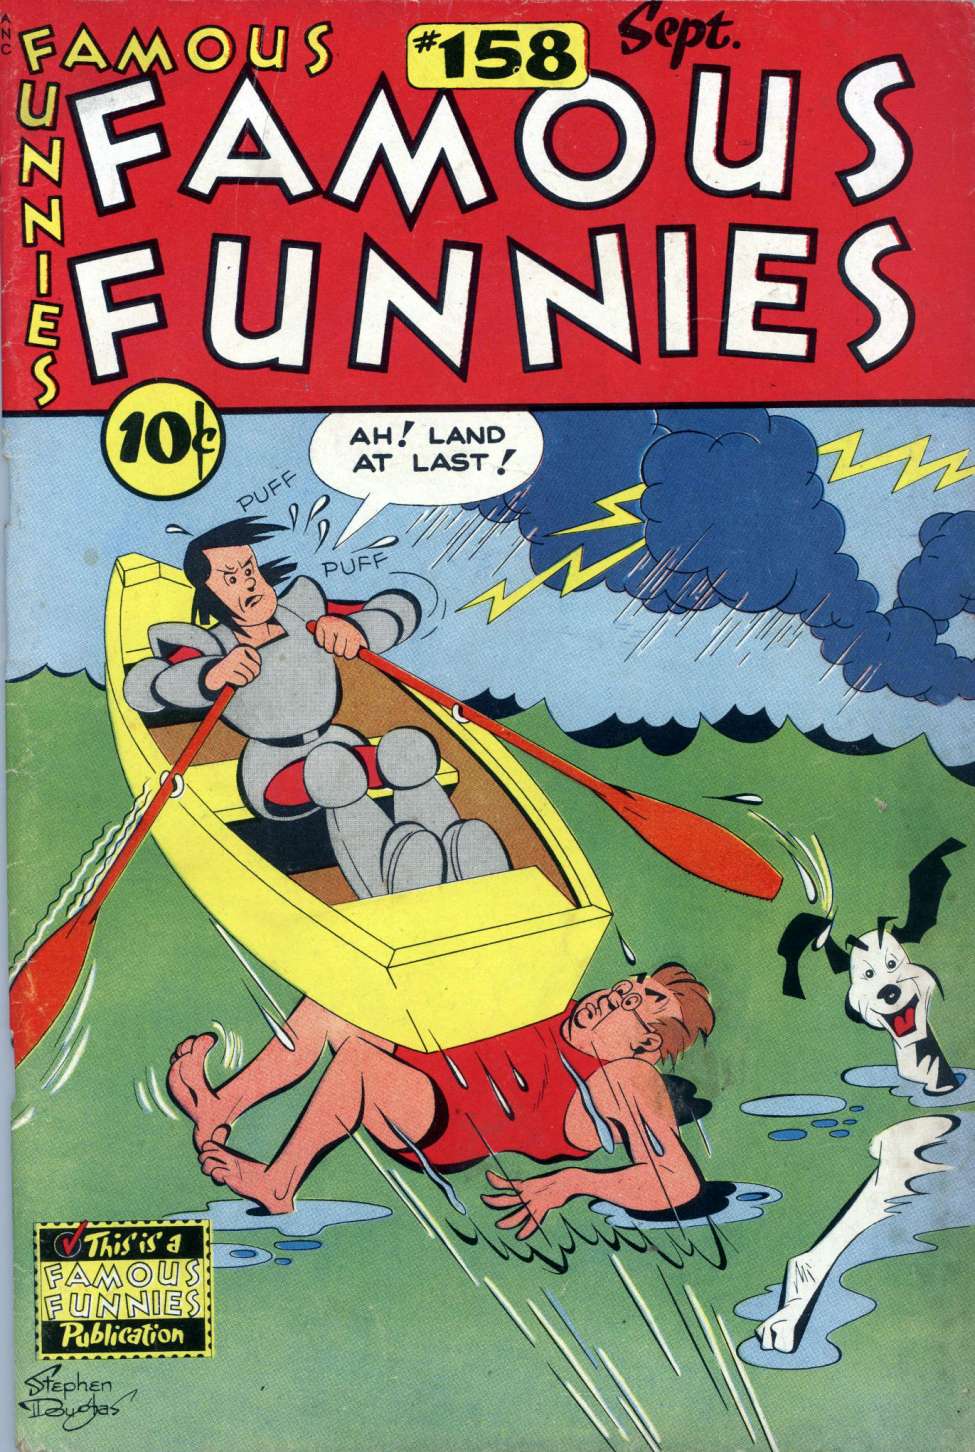 Comic Book Cover For Famous Funnies 158 (alt) - Version 1